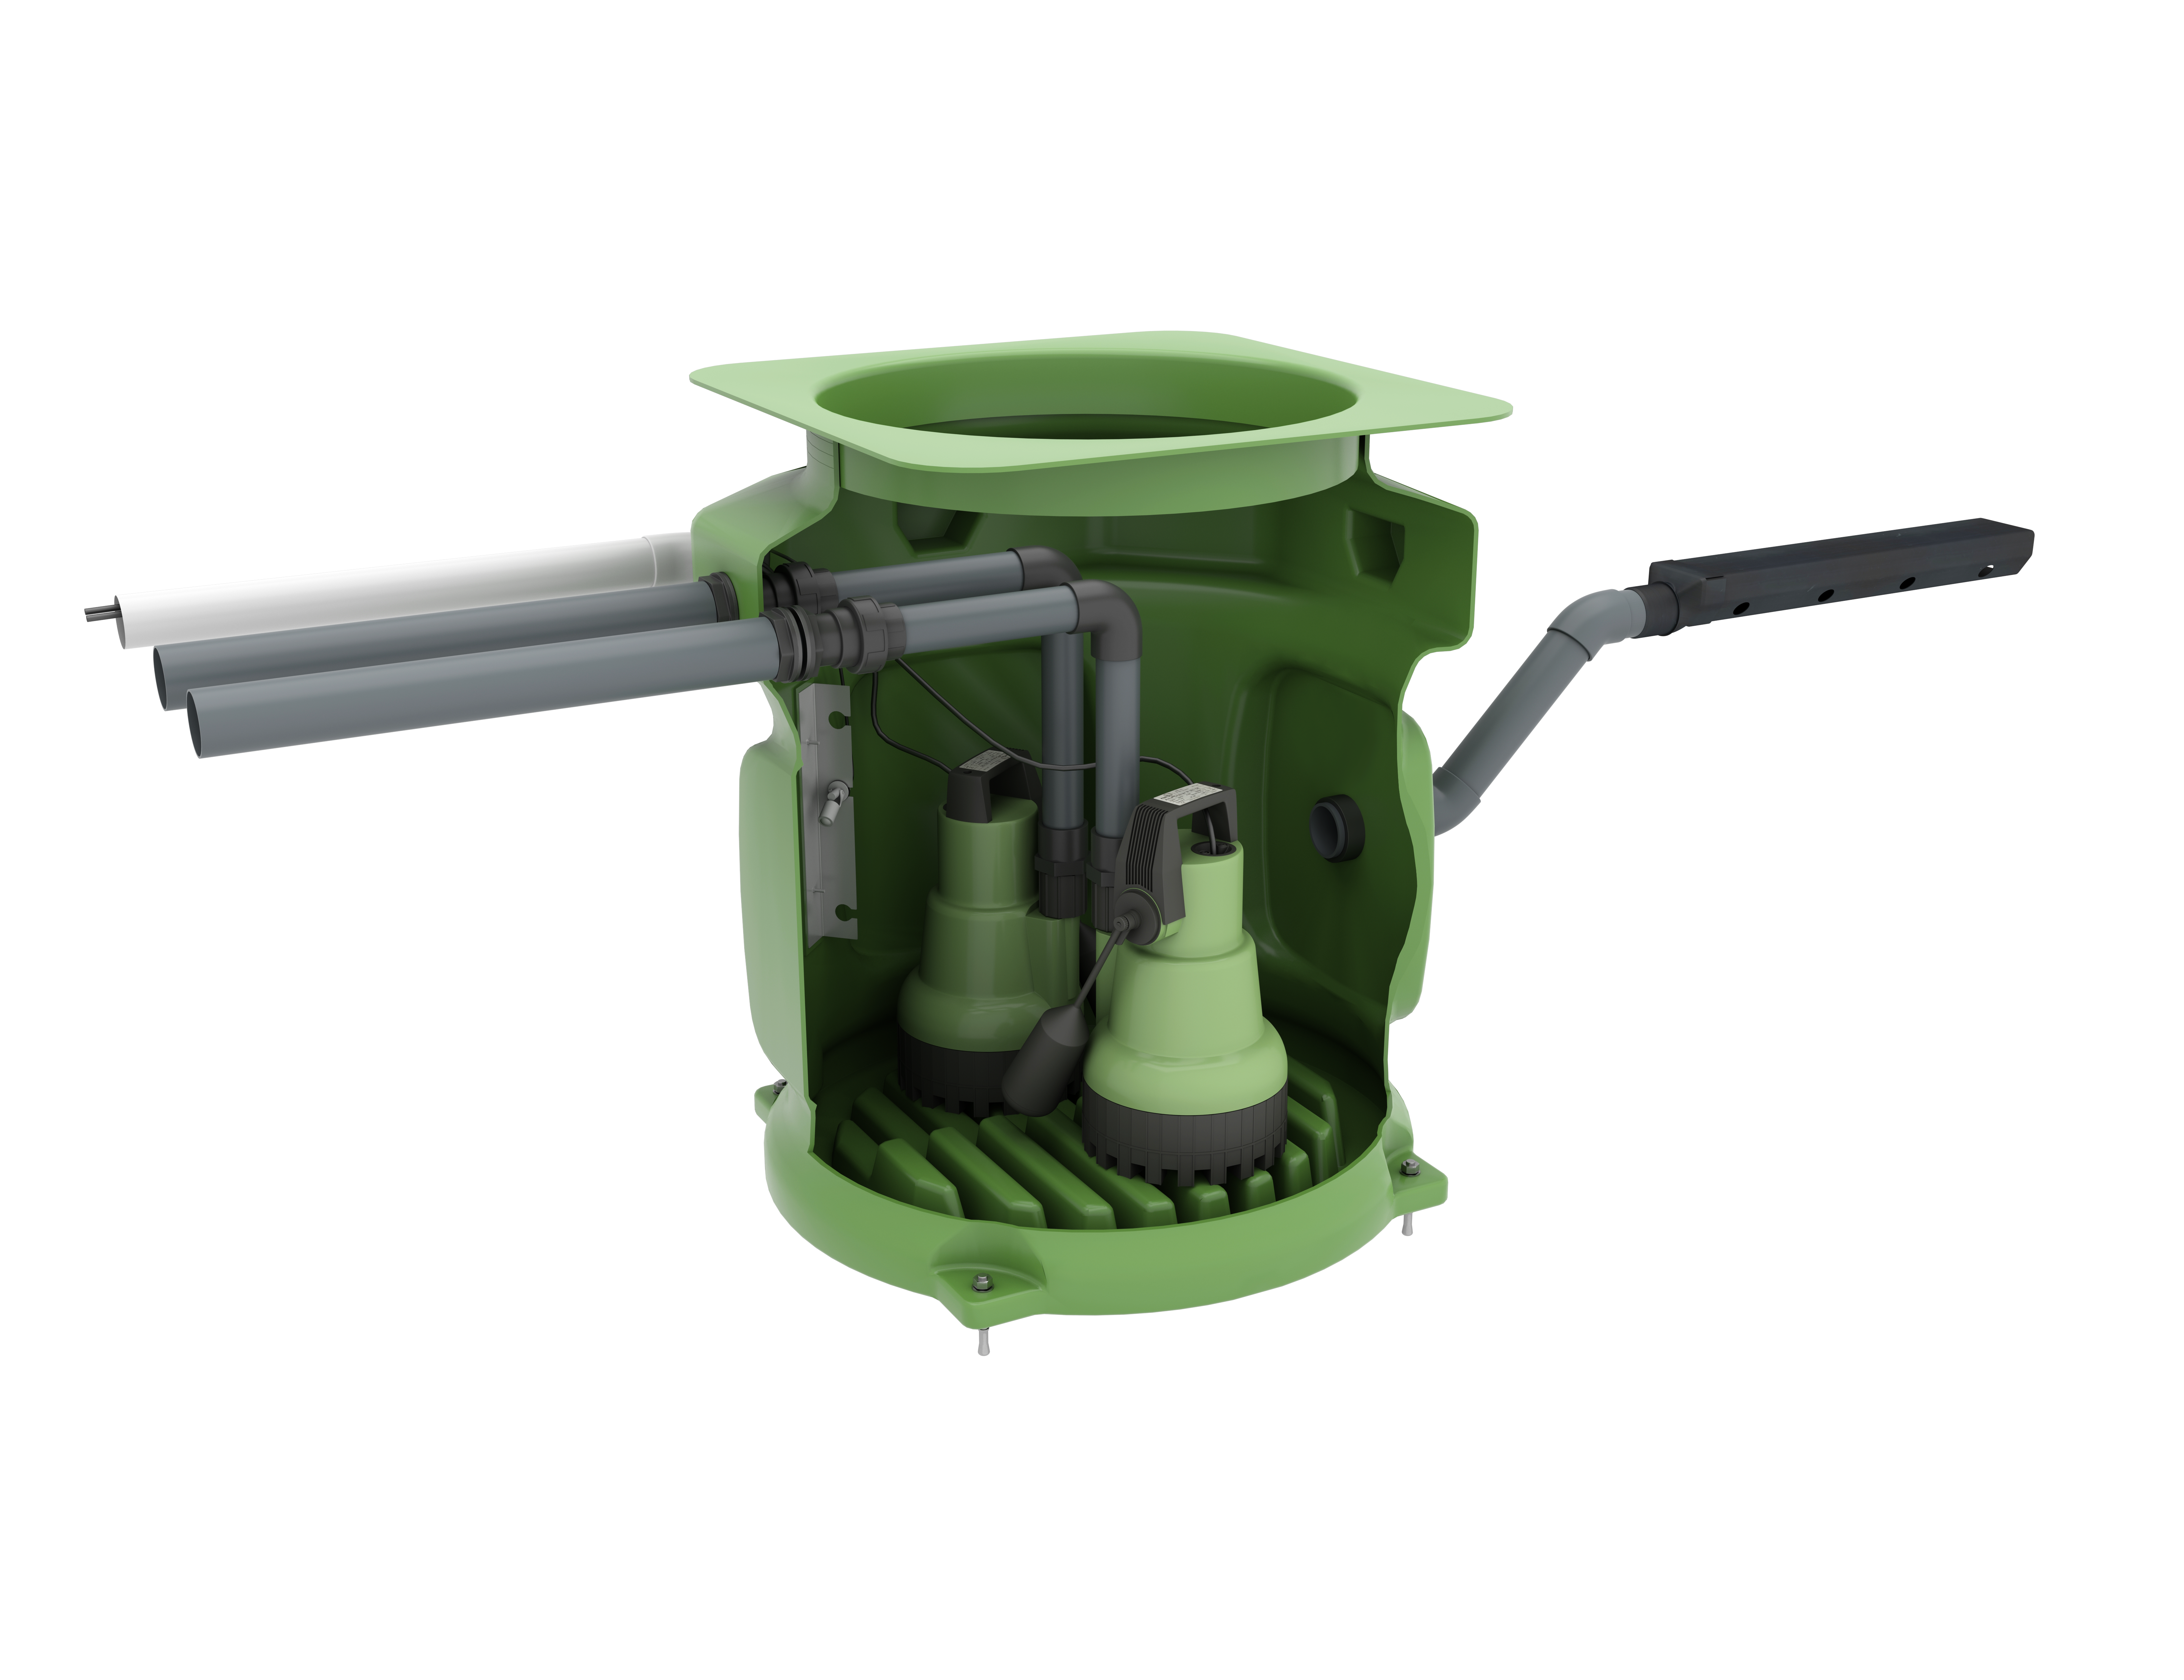 Wykamol launch the ultimate basement waterproofing sump system